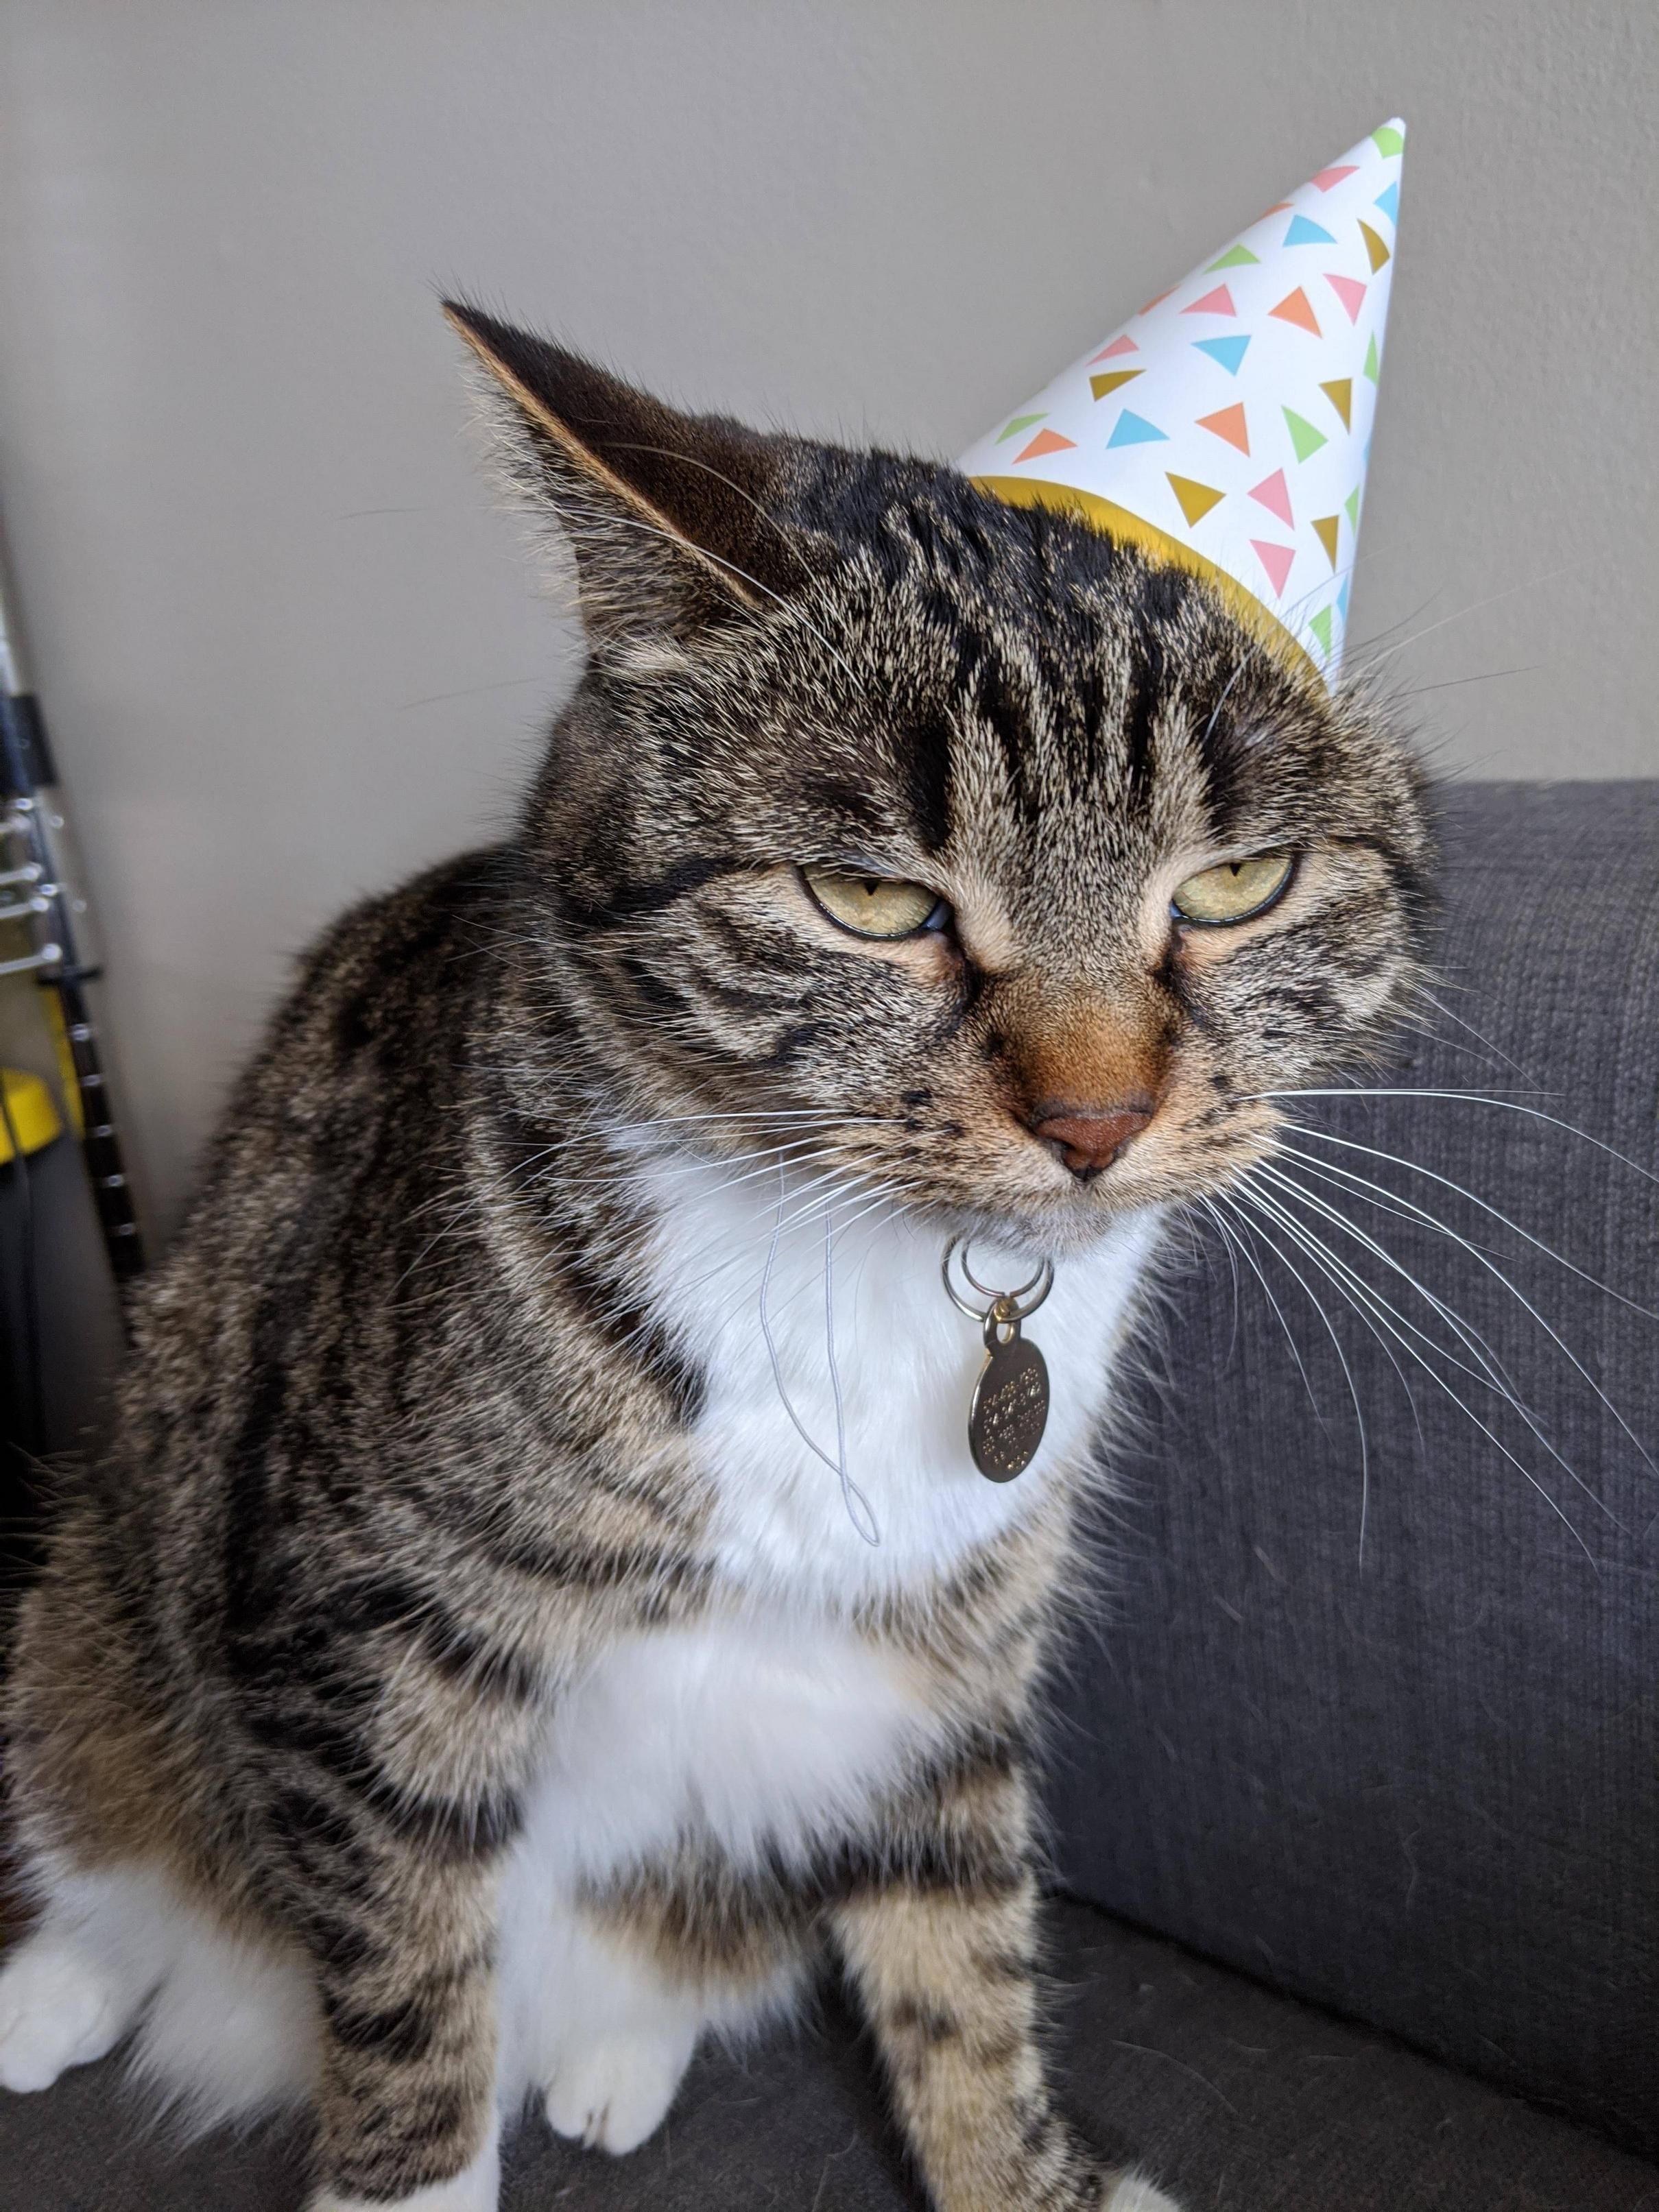 My cat turned 3, she was not impressed with the celebrations